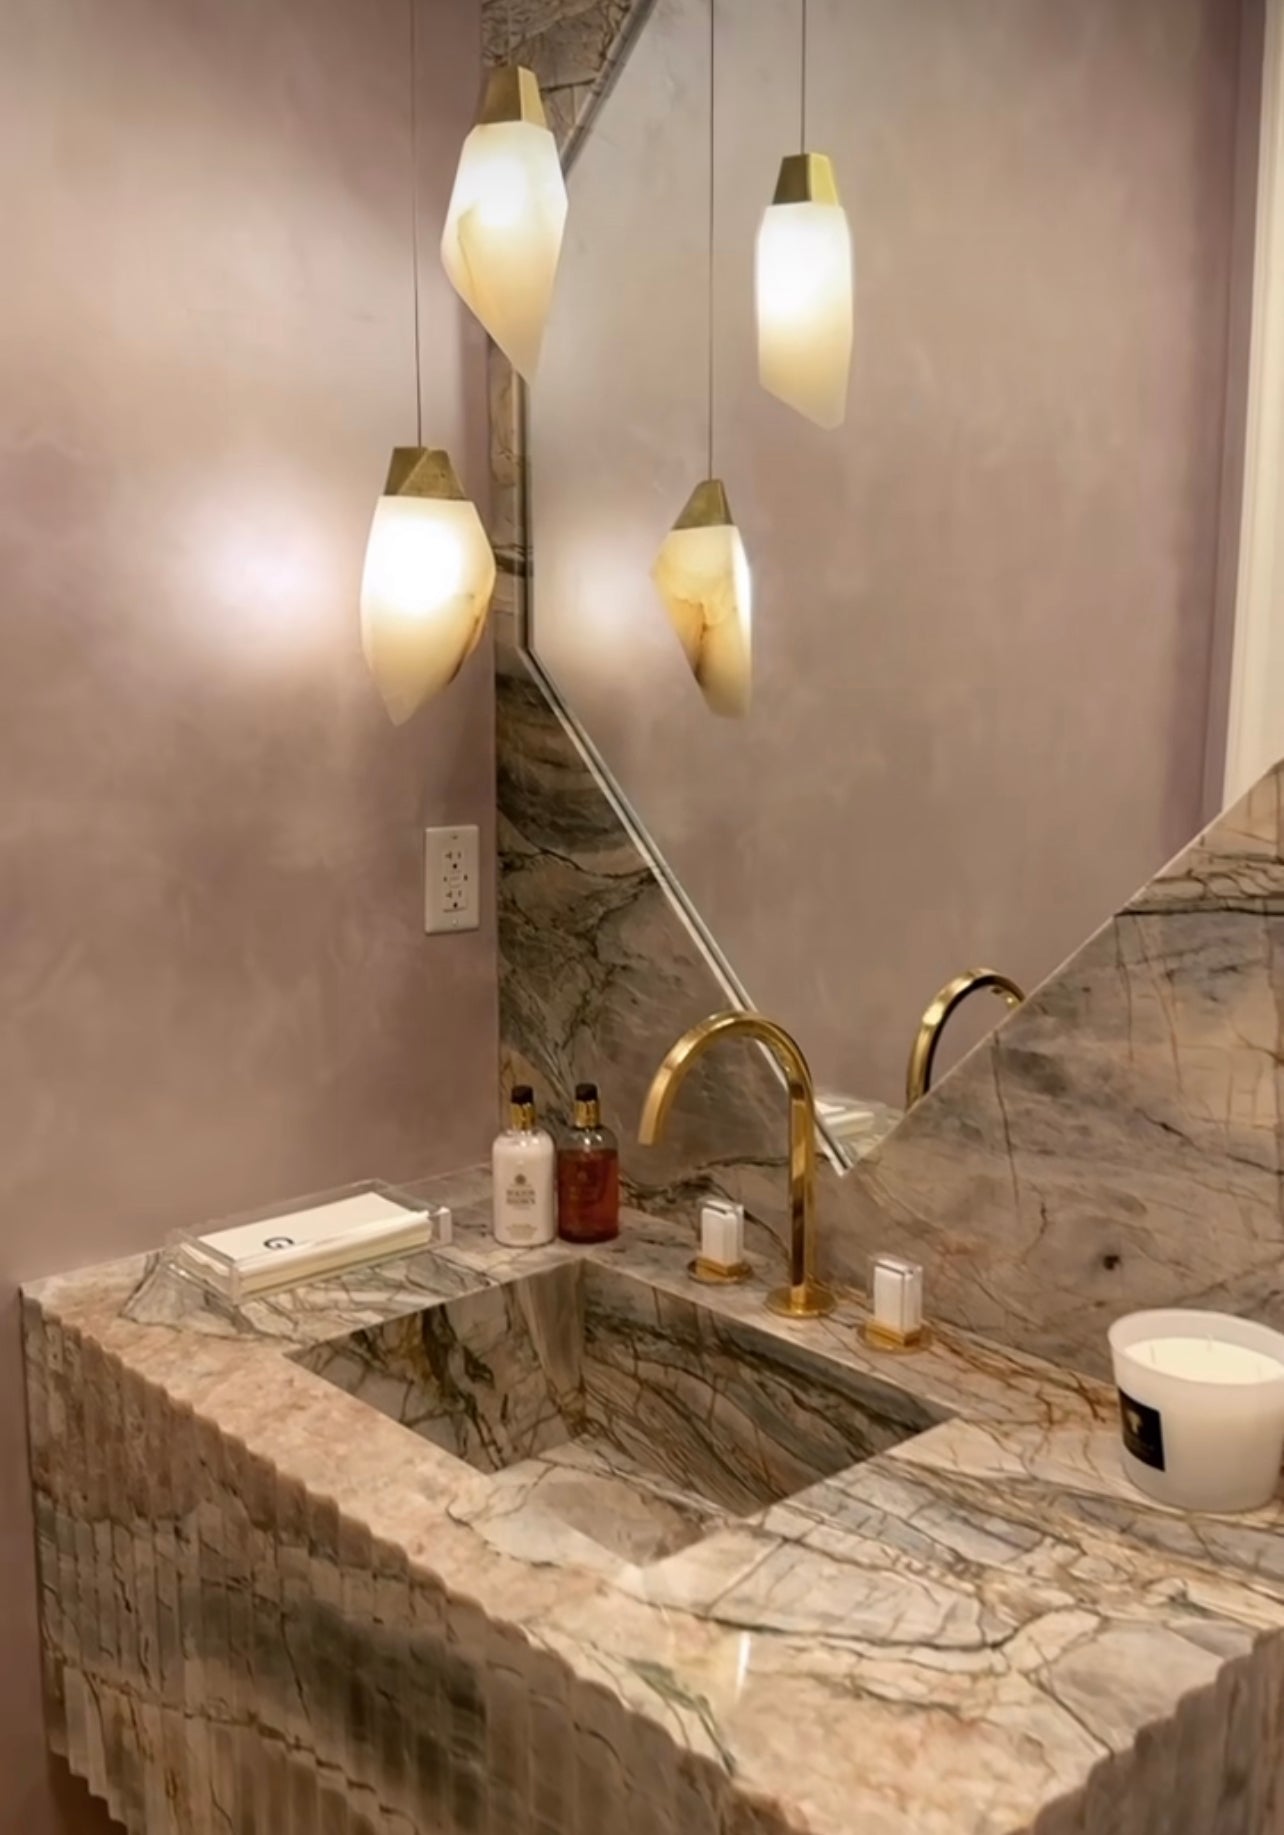 This Randy Zieber Alabaster natural stone with an antique brass set of two pendants looks perfect matching the facet shape on the onyx stone trim mirror. 